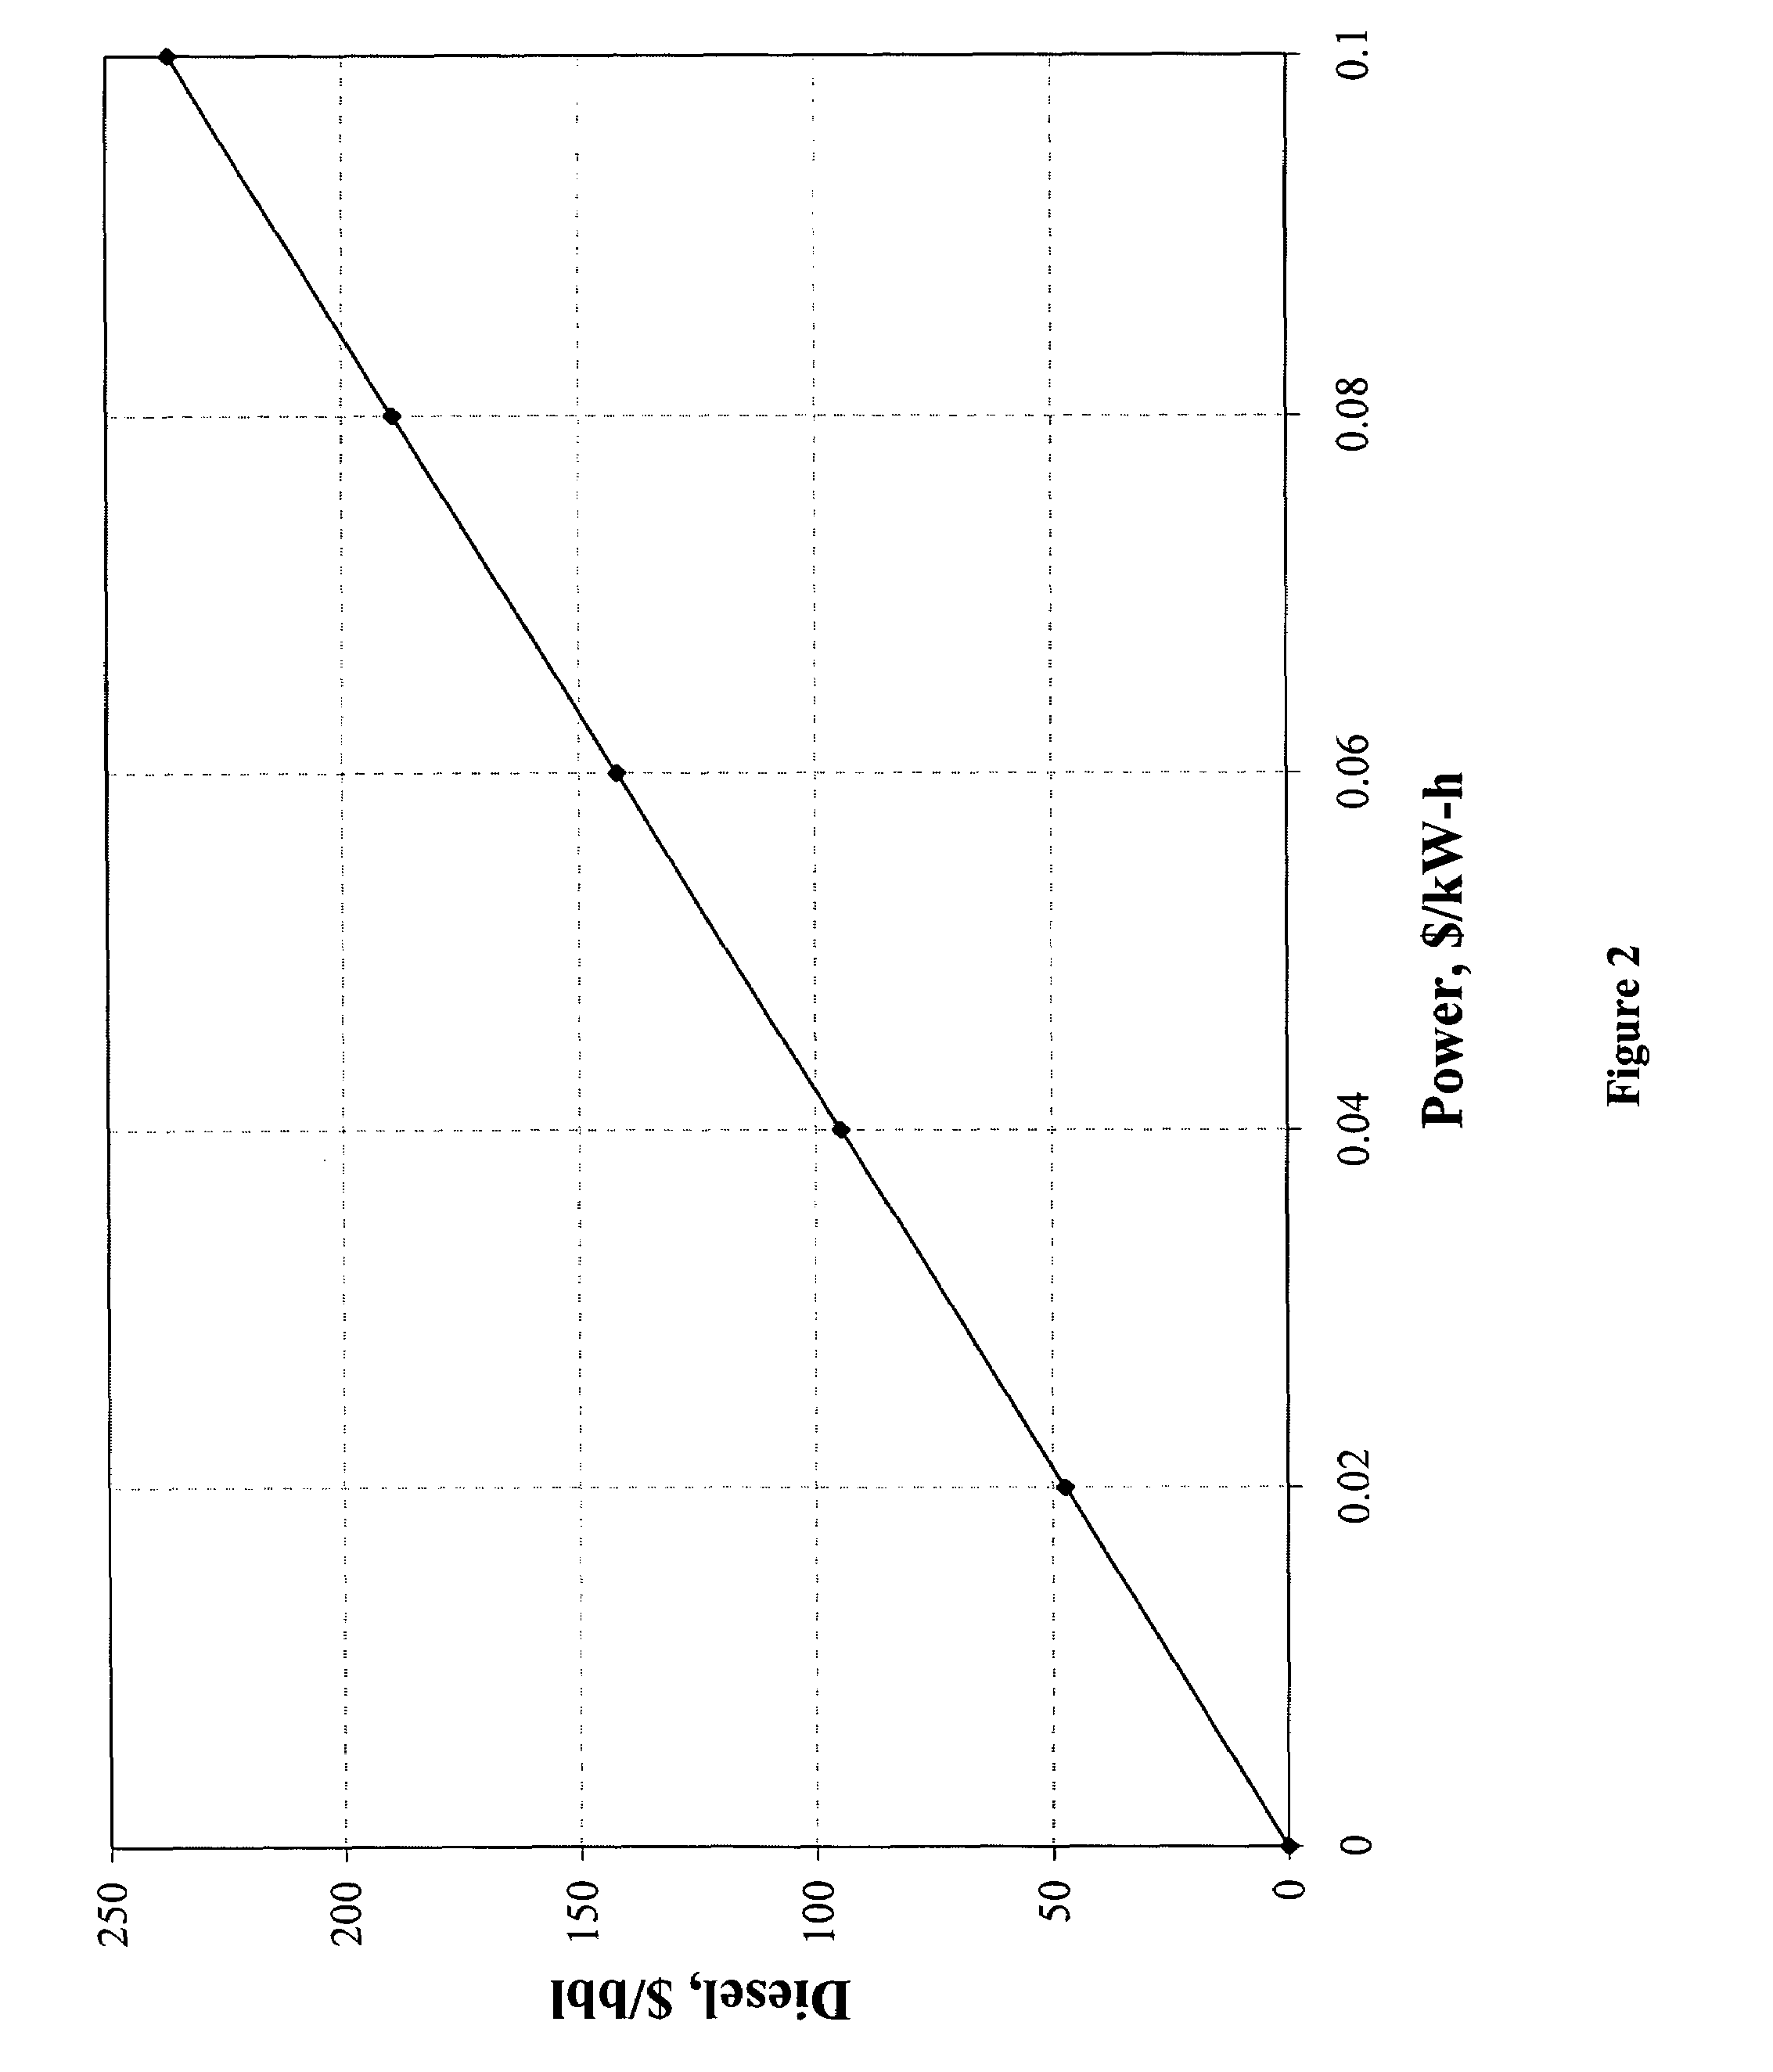 Method for providing auxiliary power to an electric power plant using fischer-tropsch technology